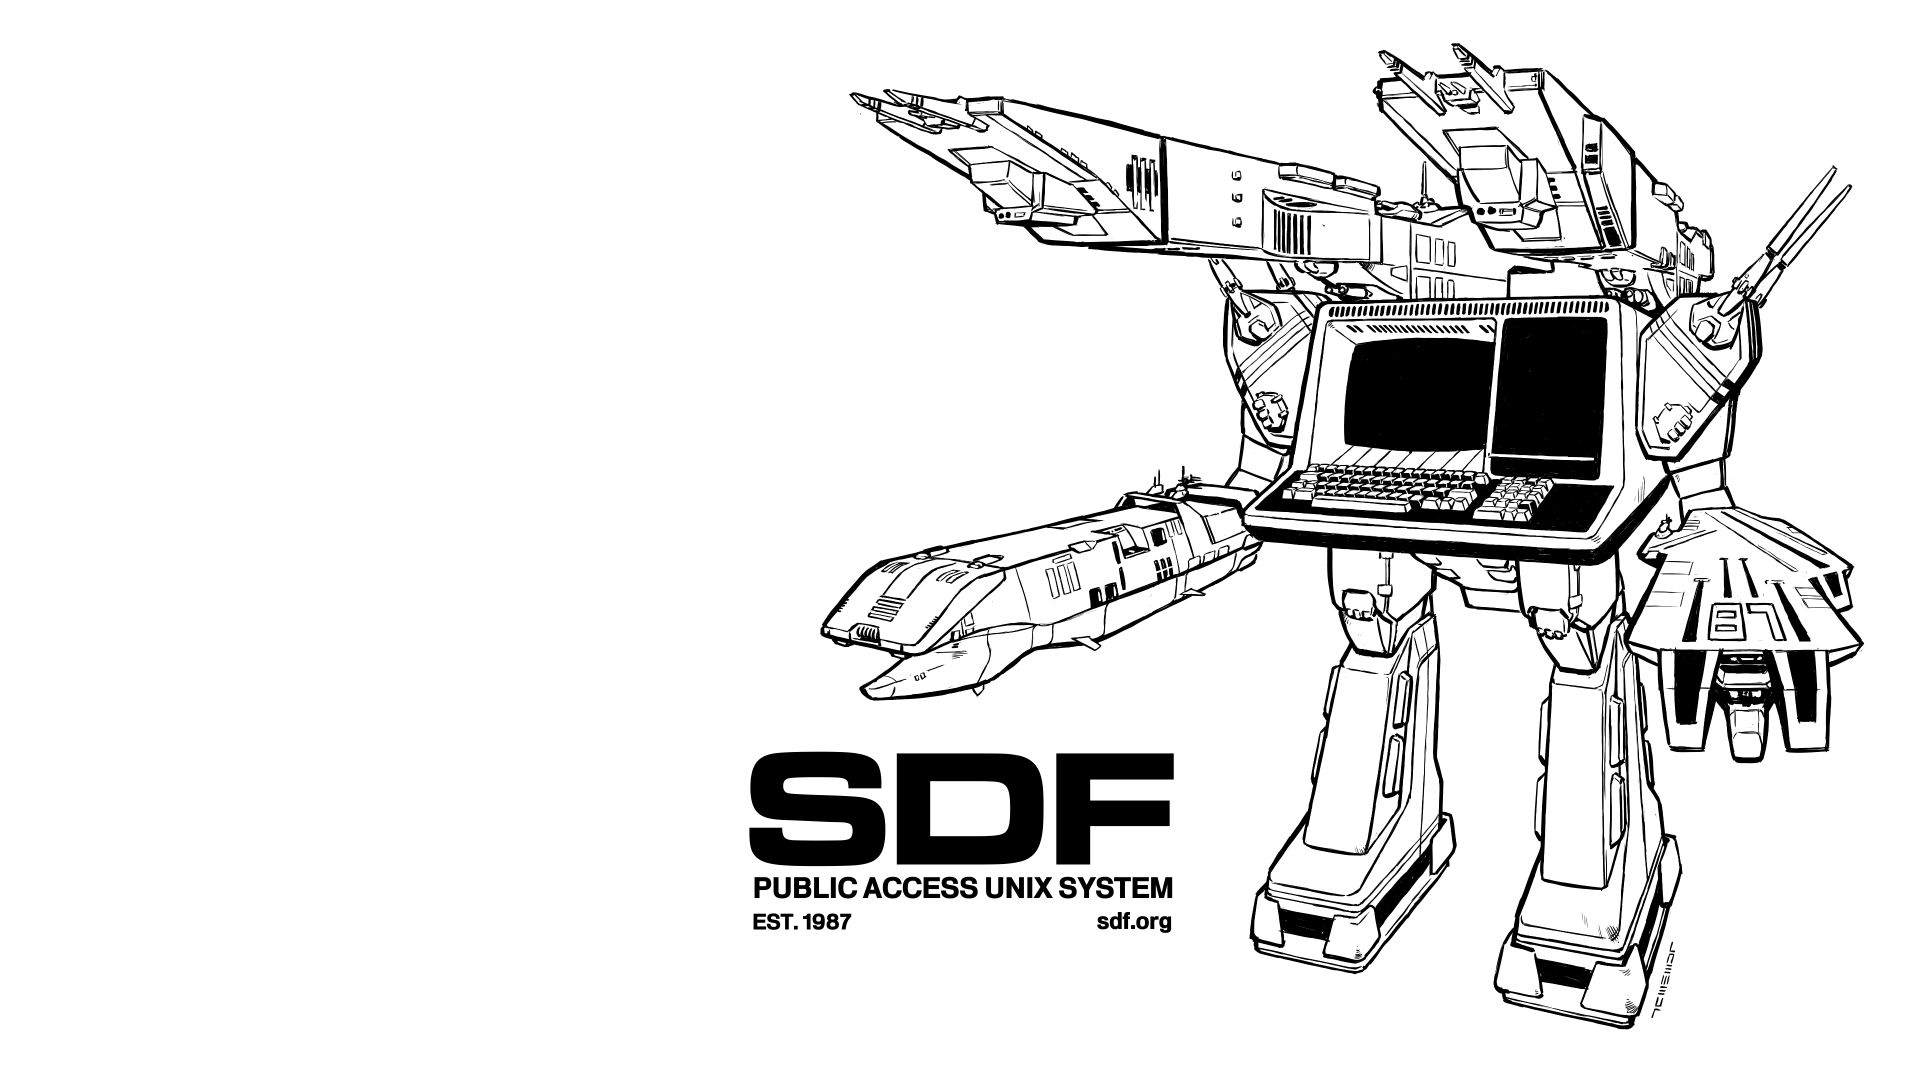 Desktop wallpaper featuring a mecha resembling the SDF Macross, but with a DEC VT52 terminal instead of the main body.